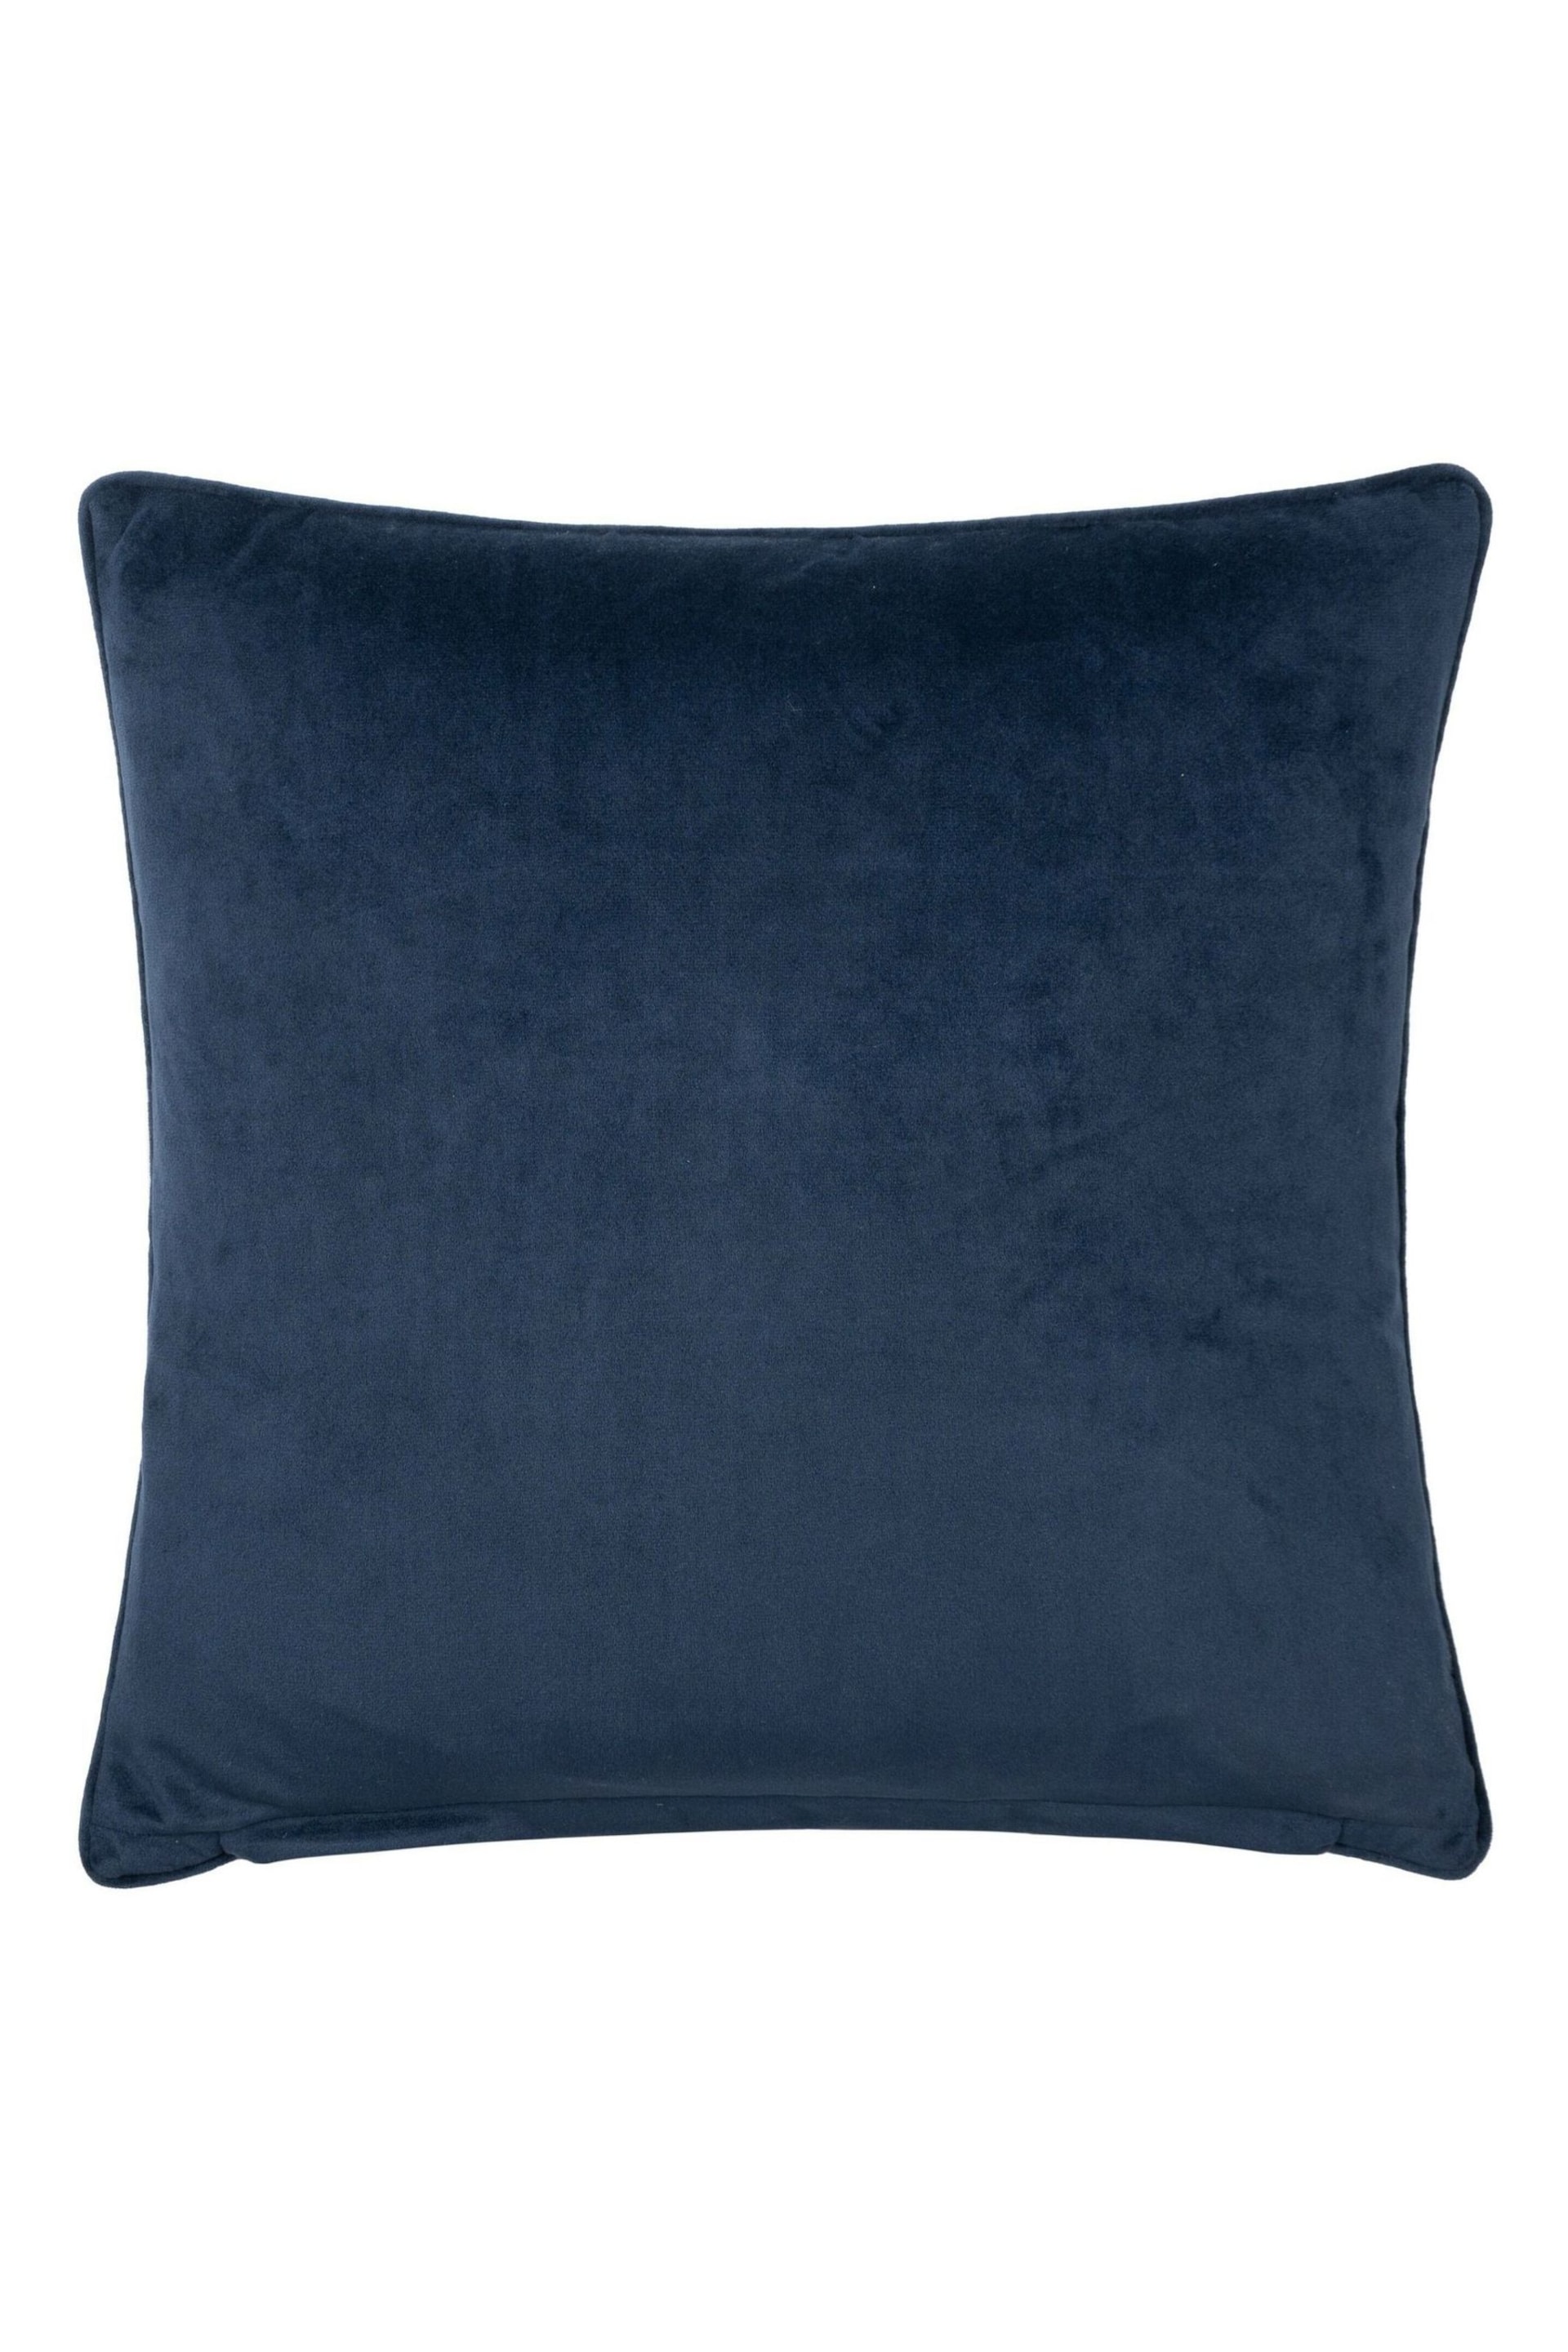 Paoletti Blue Stratus Jacquard Polyester Filled Cushion - Image 3 of 6